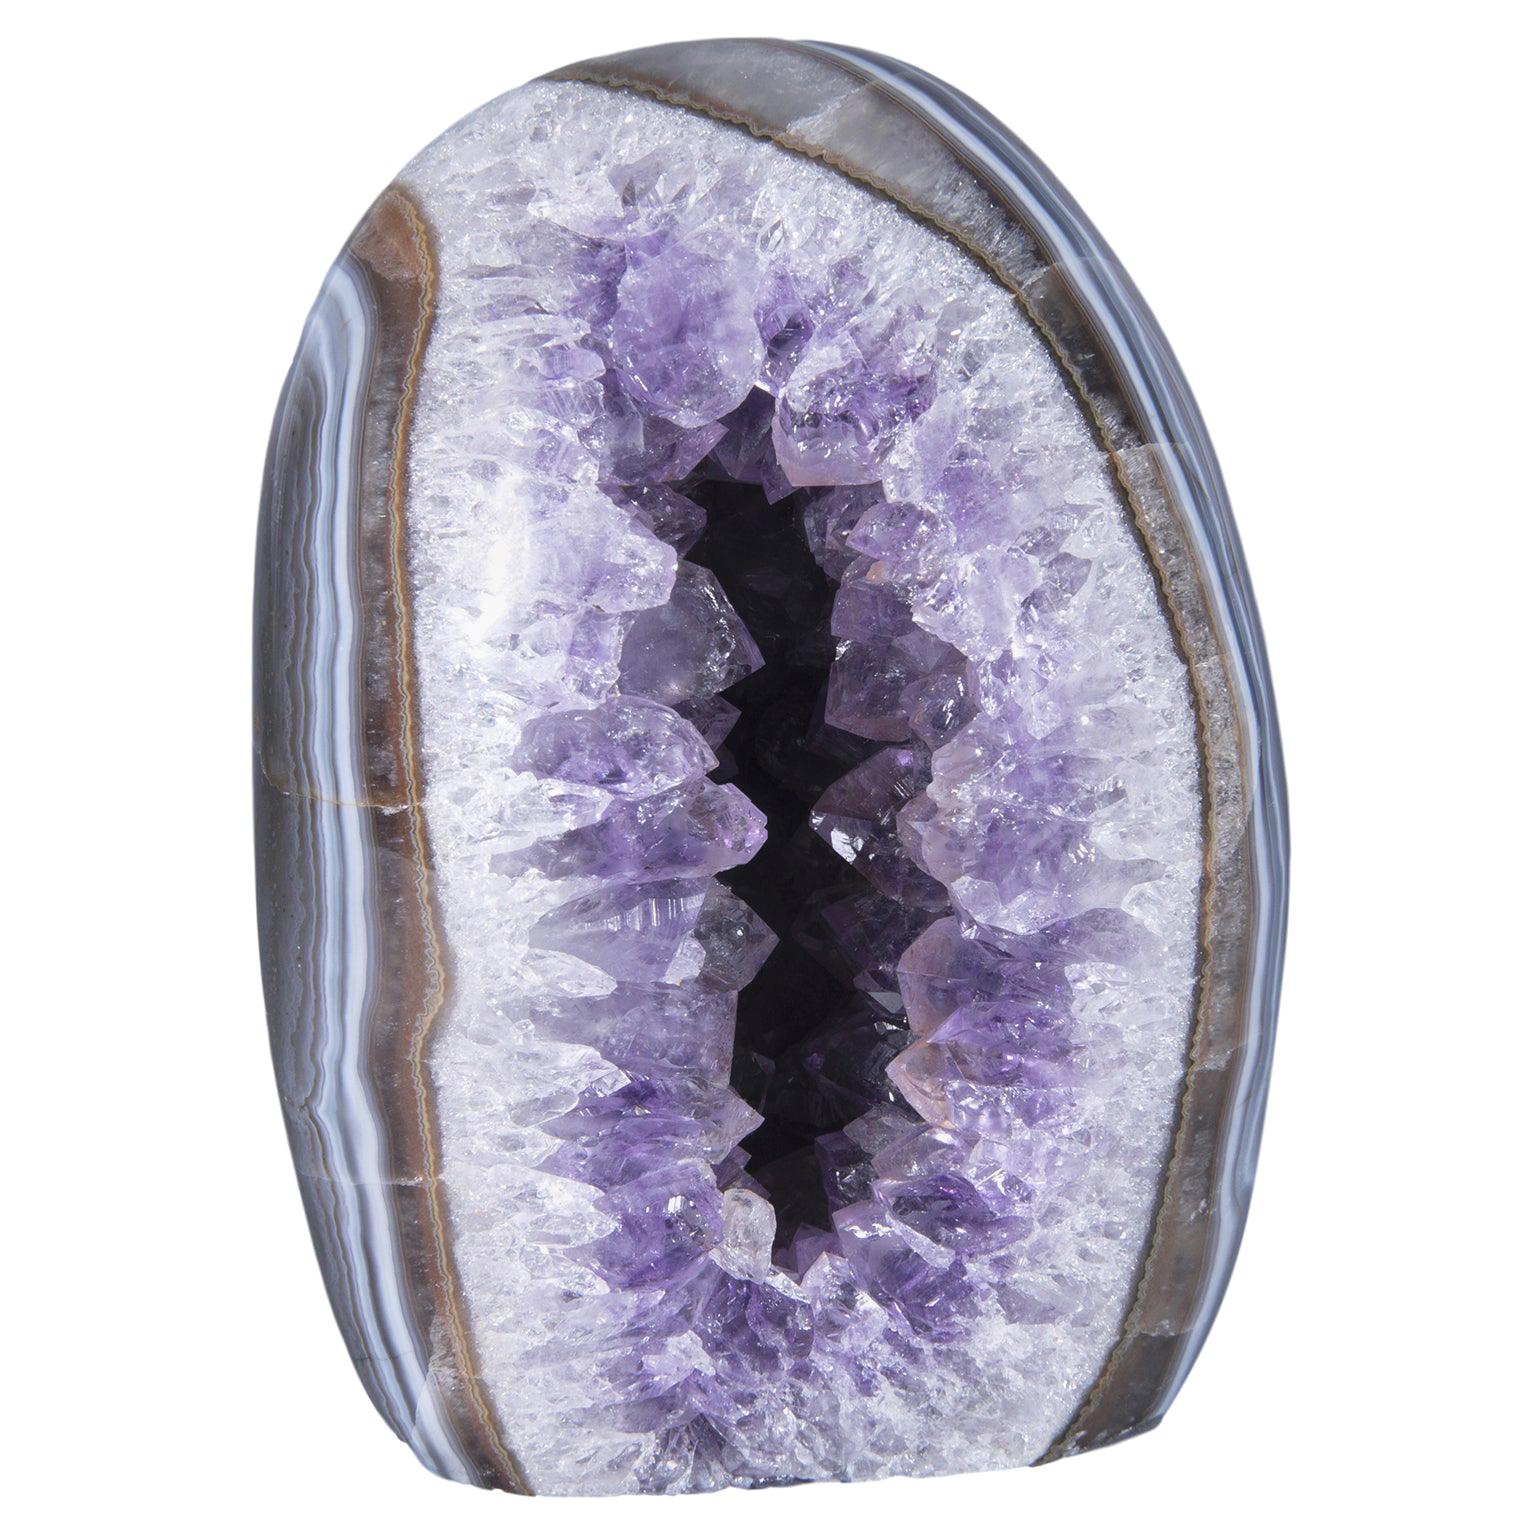 Polished Amethyst Egg Geode Surrounded by Agate and Quartz For Sale